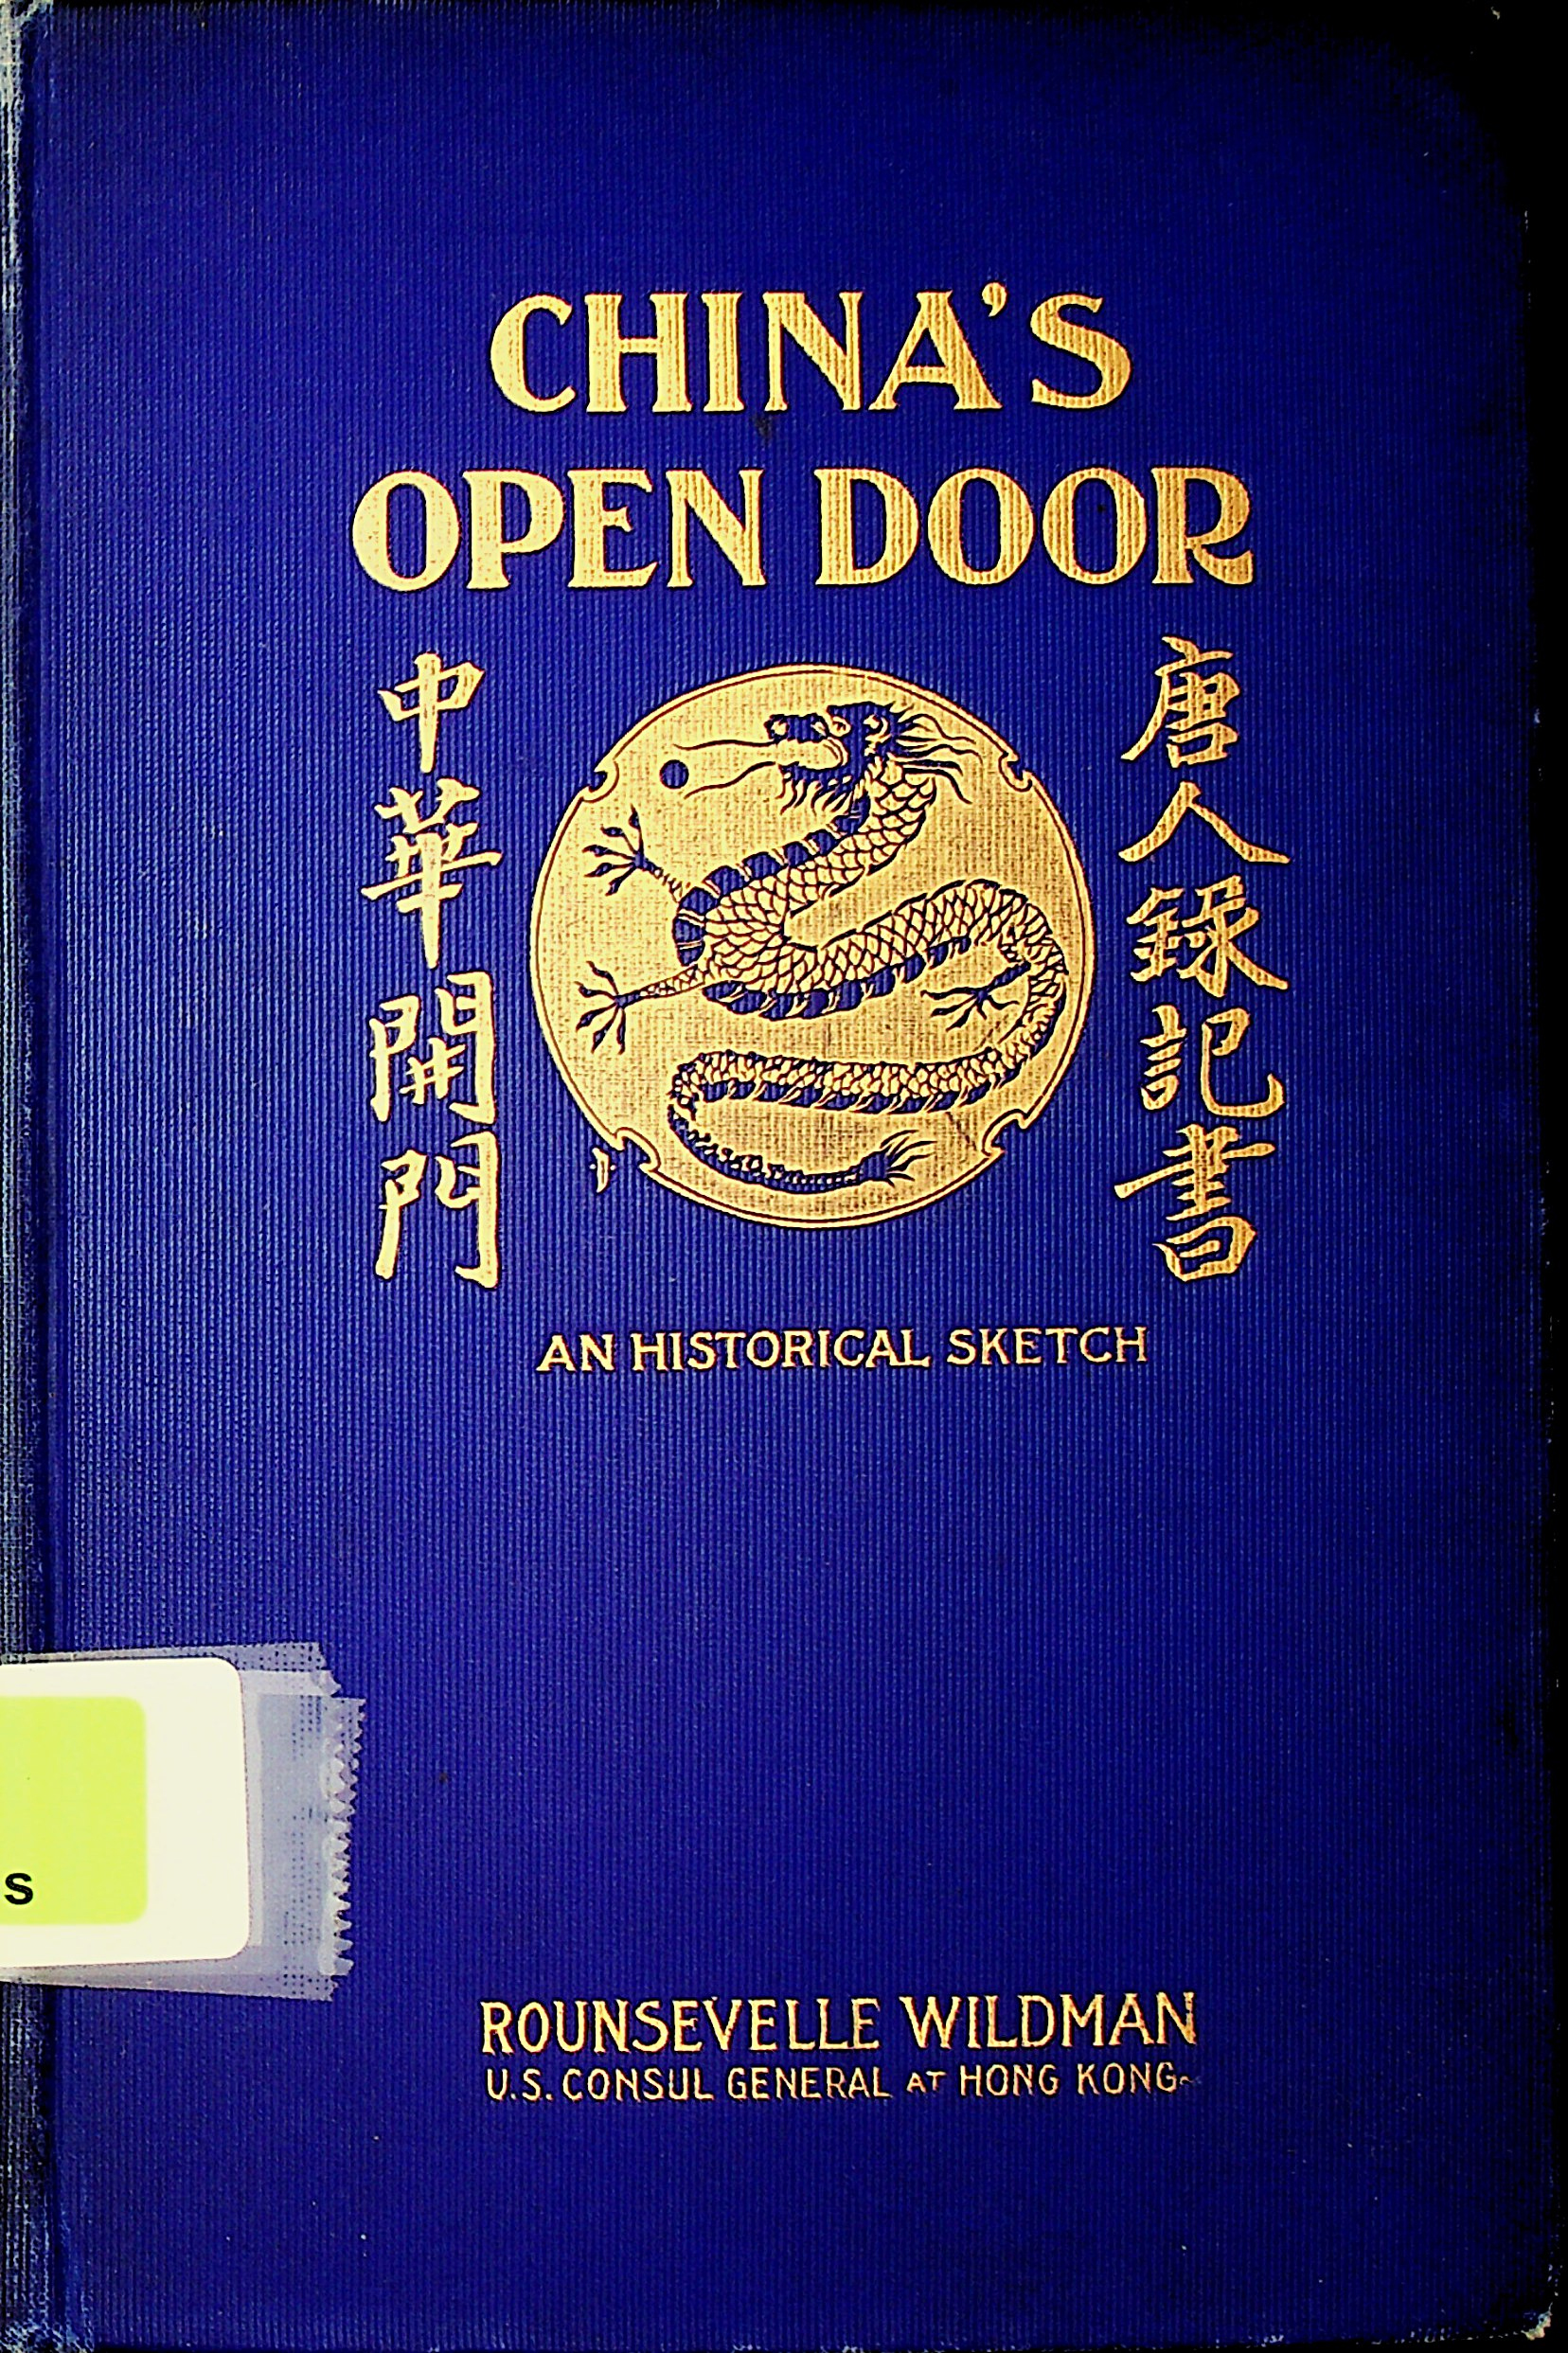 China's open door : a sketch of Chinese life and history 